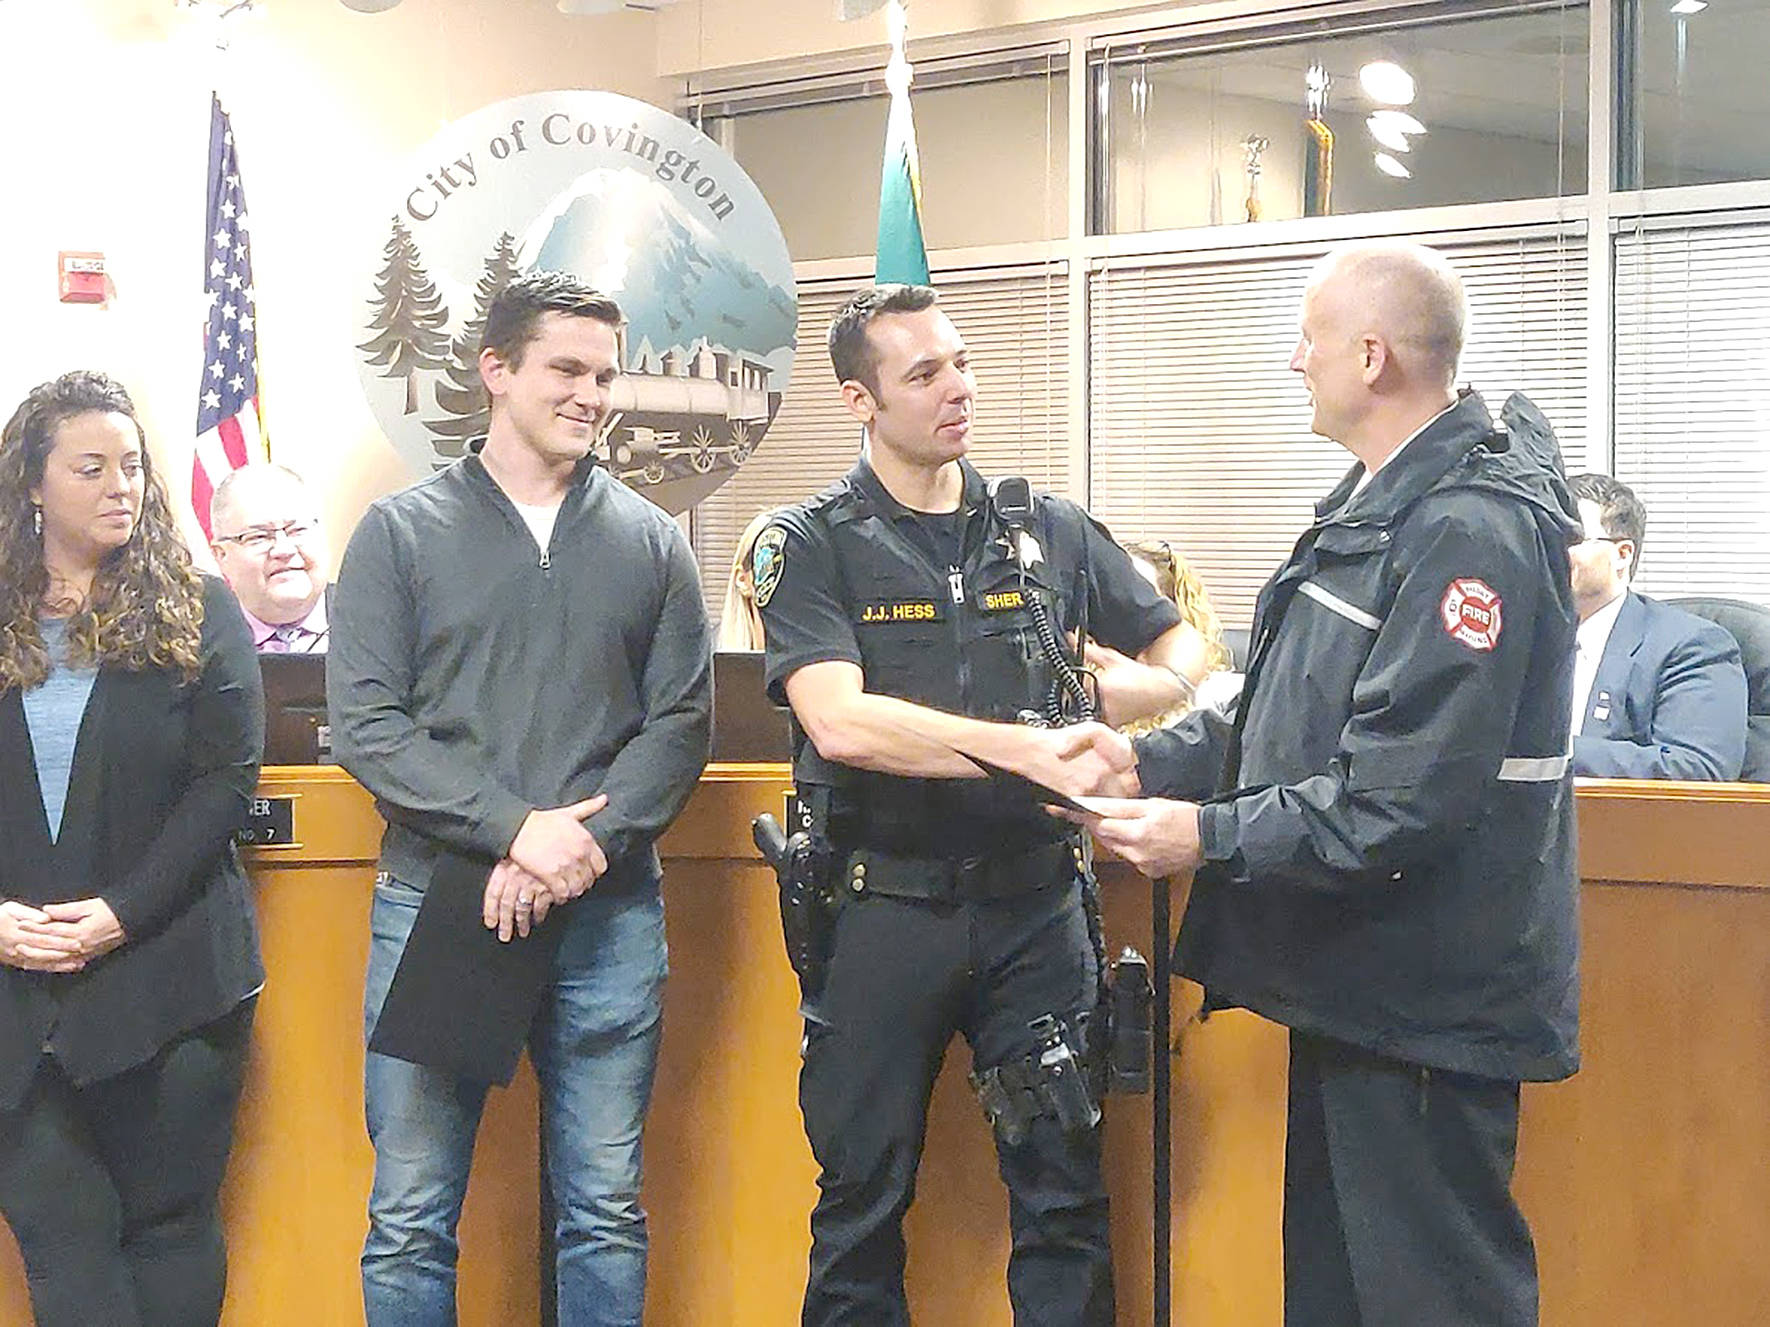 Covington Police officers Branson Carr, left, and Jordan Hess, right, were honored by Captain Joe Root of the Puget Sound Regional Fire Authority for their efforts in saving resident Debra Stevens life during the Monday, Jan. 27, 2020, city council meeting. Photo by Danielle Chastaine.